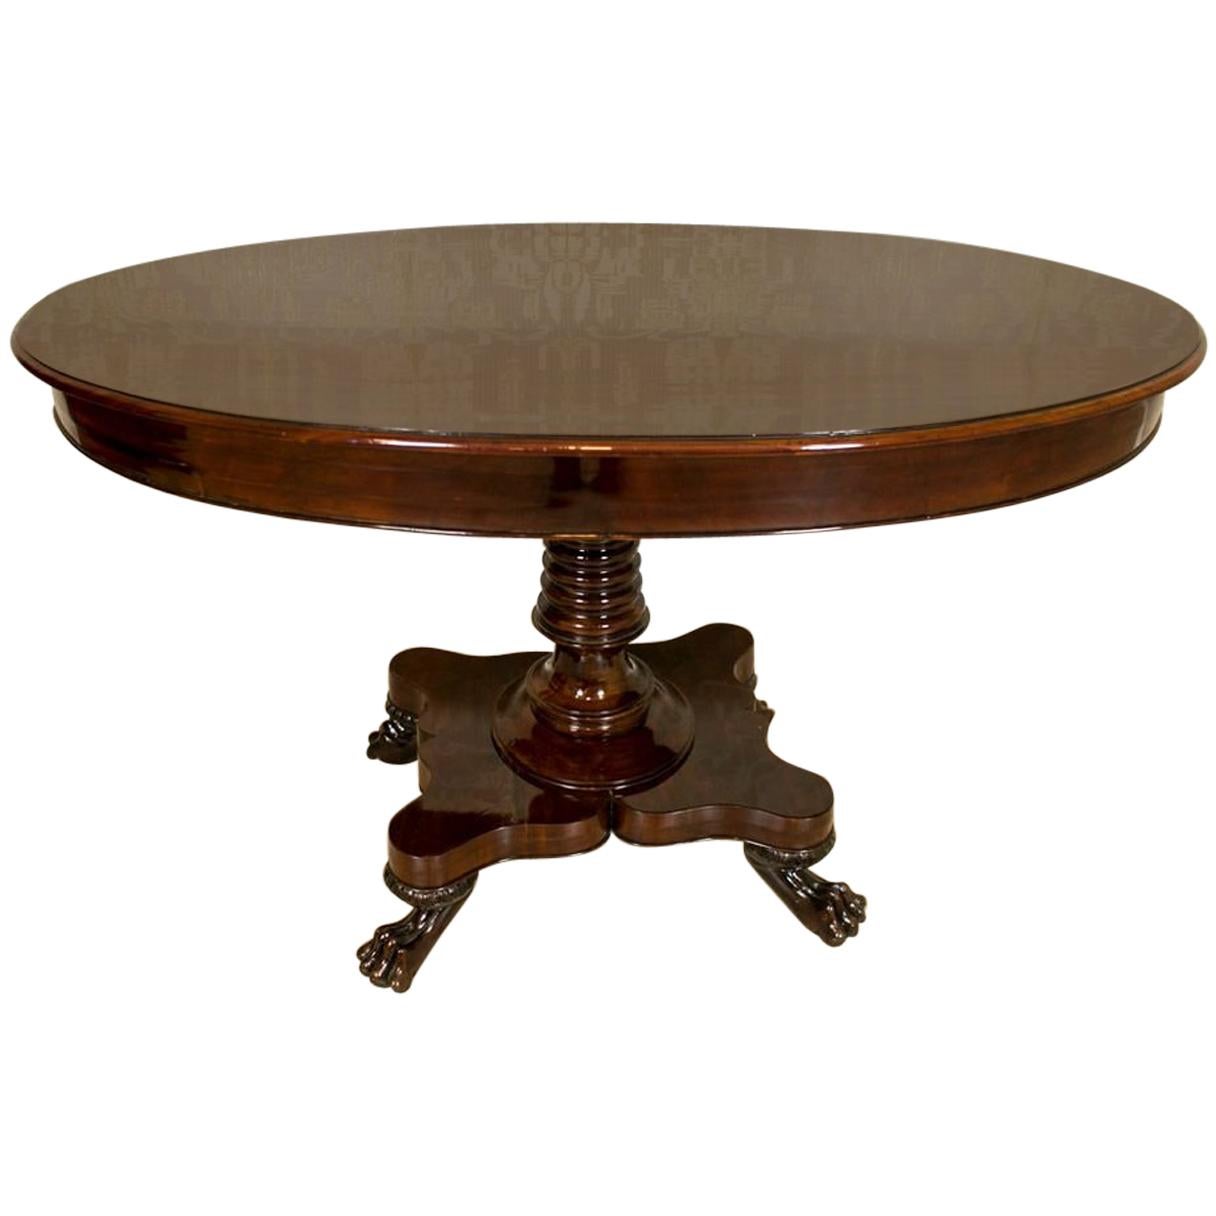 Oval Living Room Table from the Second Half of the 19th Century